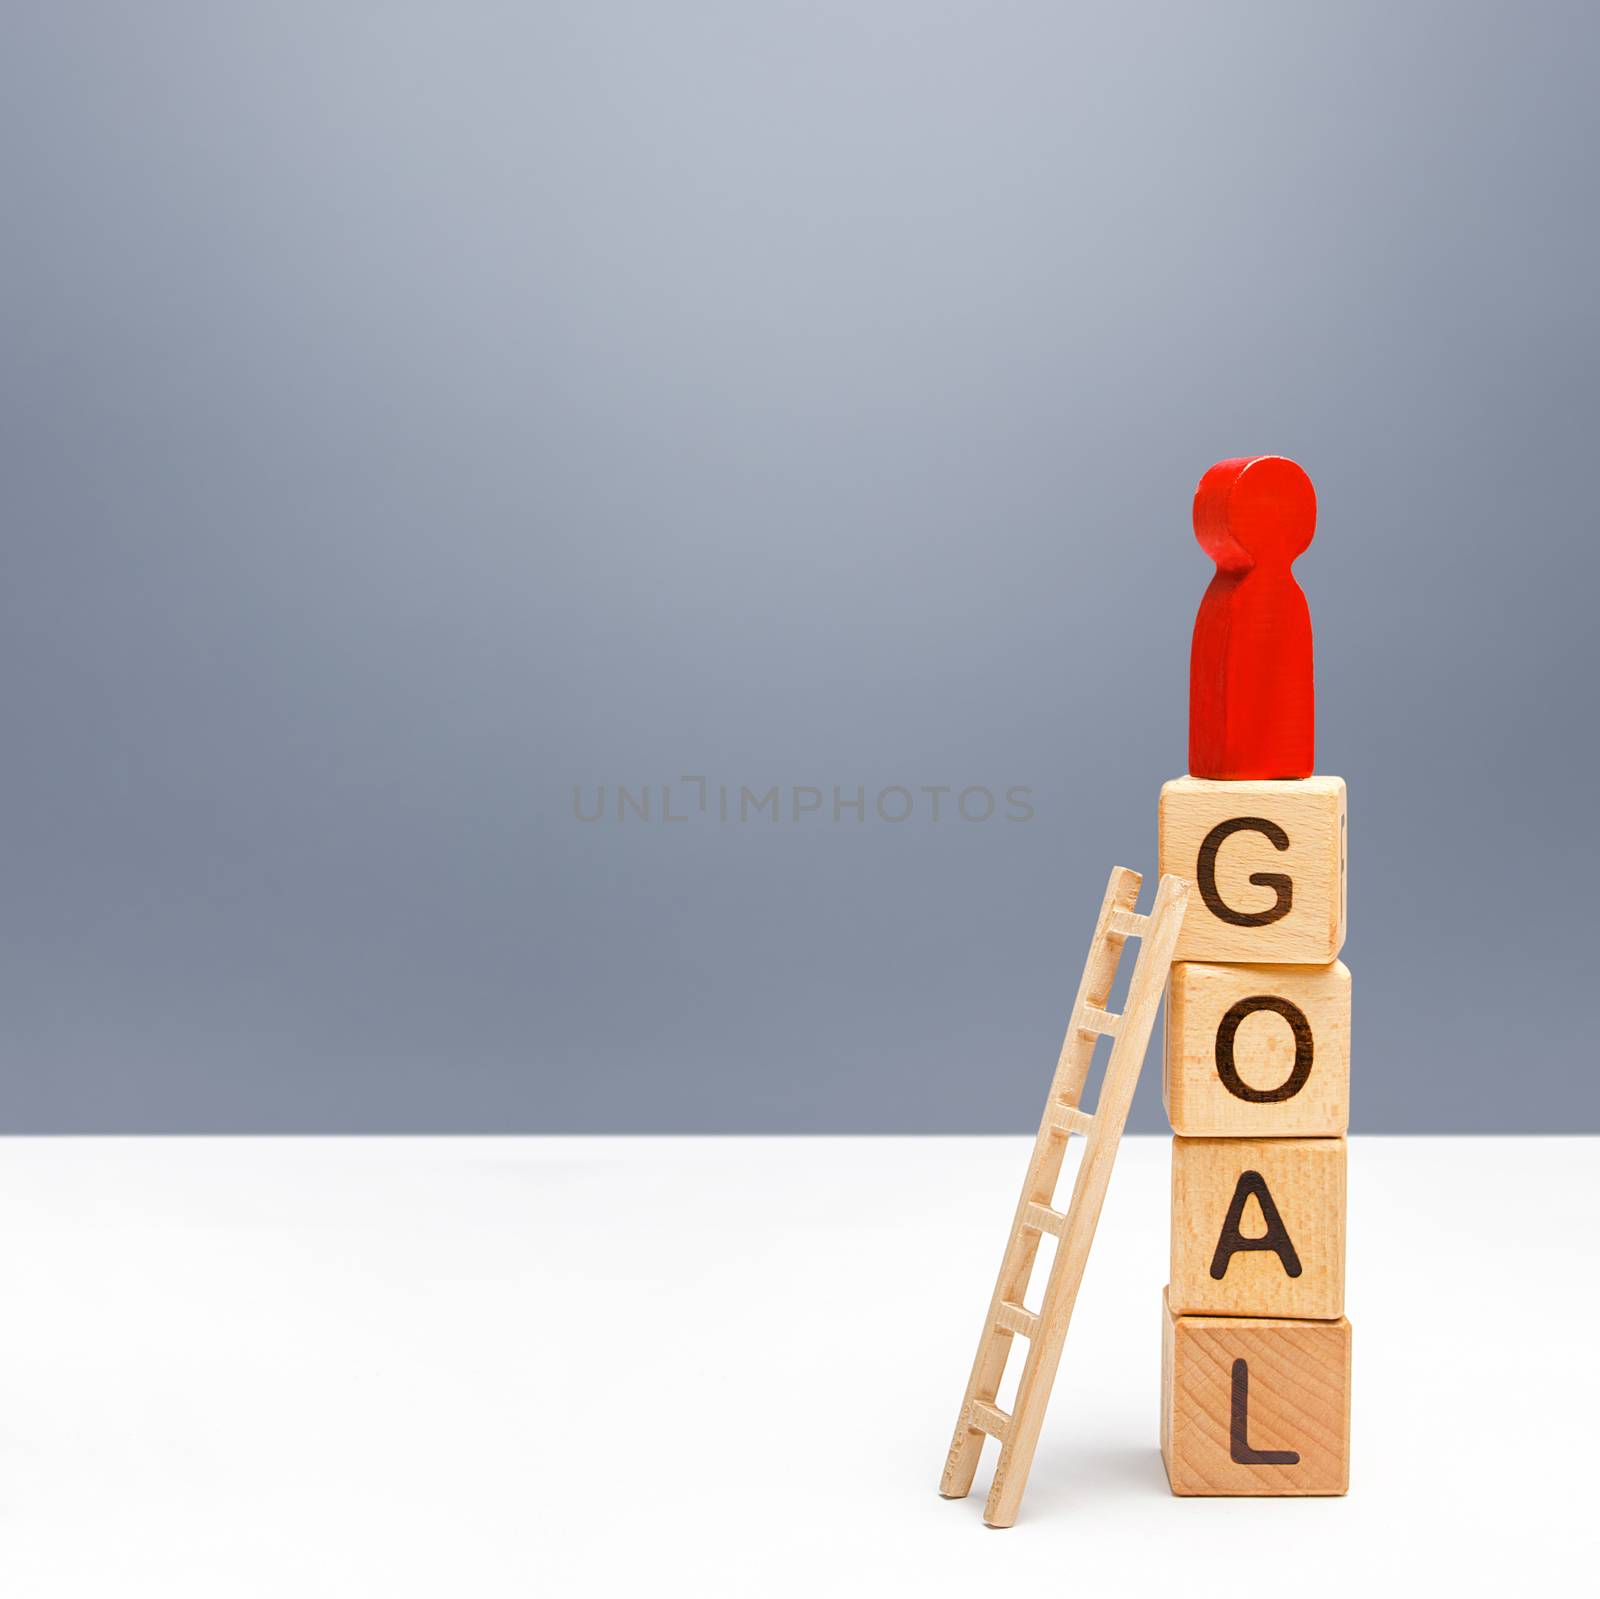 The red person climbed a tower of GOAL blocks. Developing strategy. Attracting investment and financial resources for a successful business startup. Using tools to solve problems, achieve success. by iLixe48